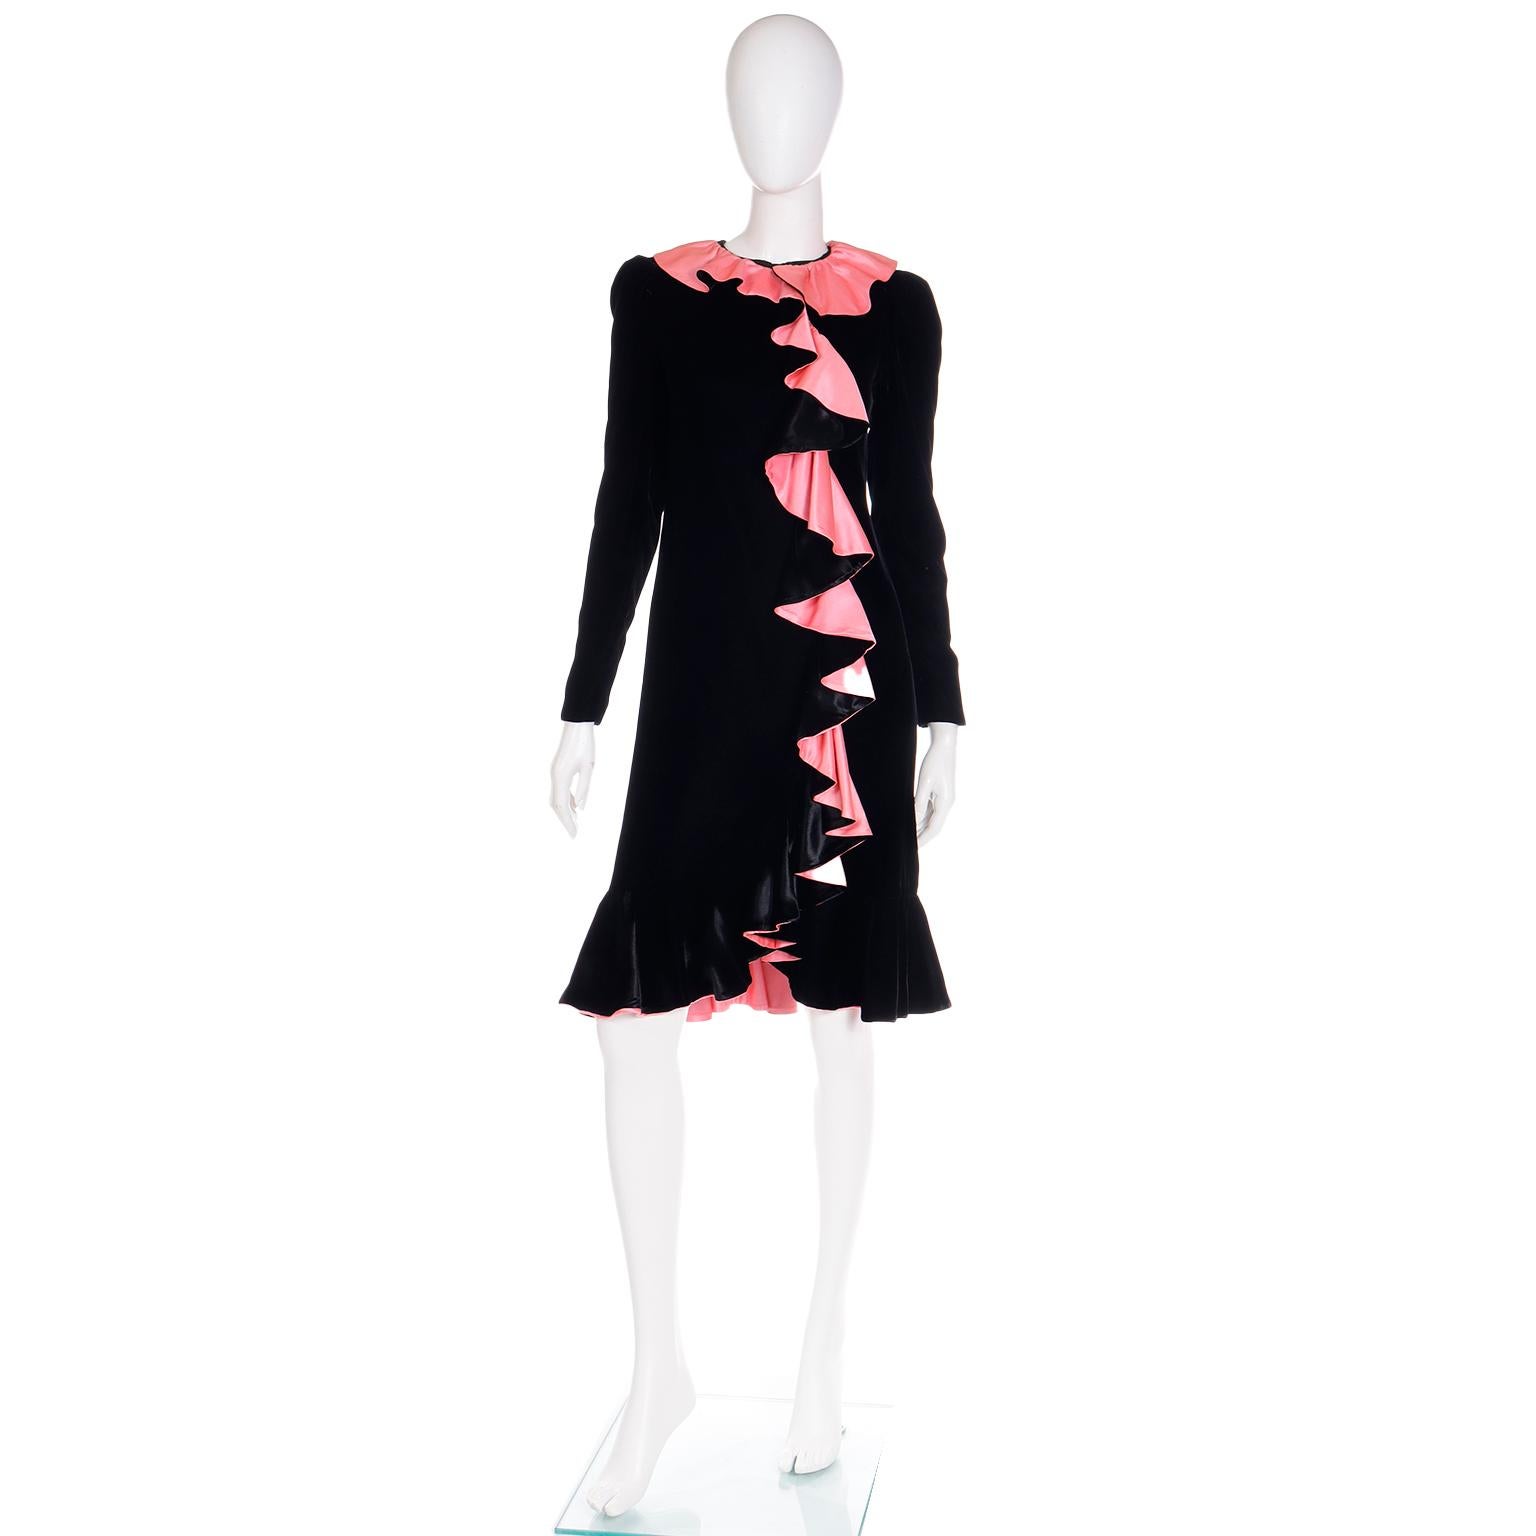 This vintage Oscar de la Renta evening dress is in a luxe black velvet and it is accented with pink satin ruffles at the collar, hem, and down the front. The dress has long sleeves and closes with a back zipper from the collar to the hips with snaps